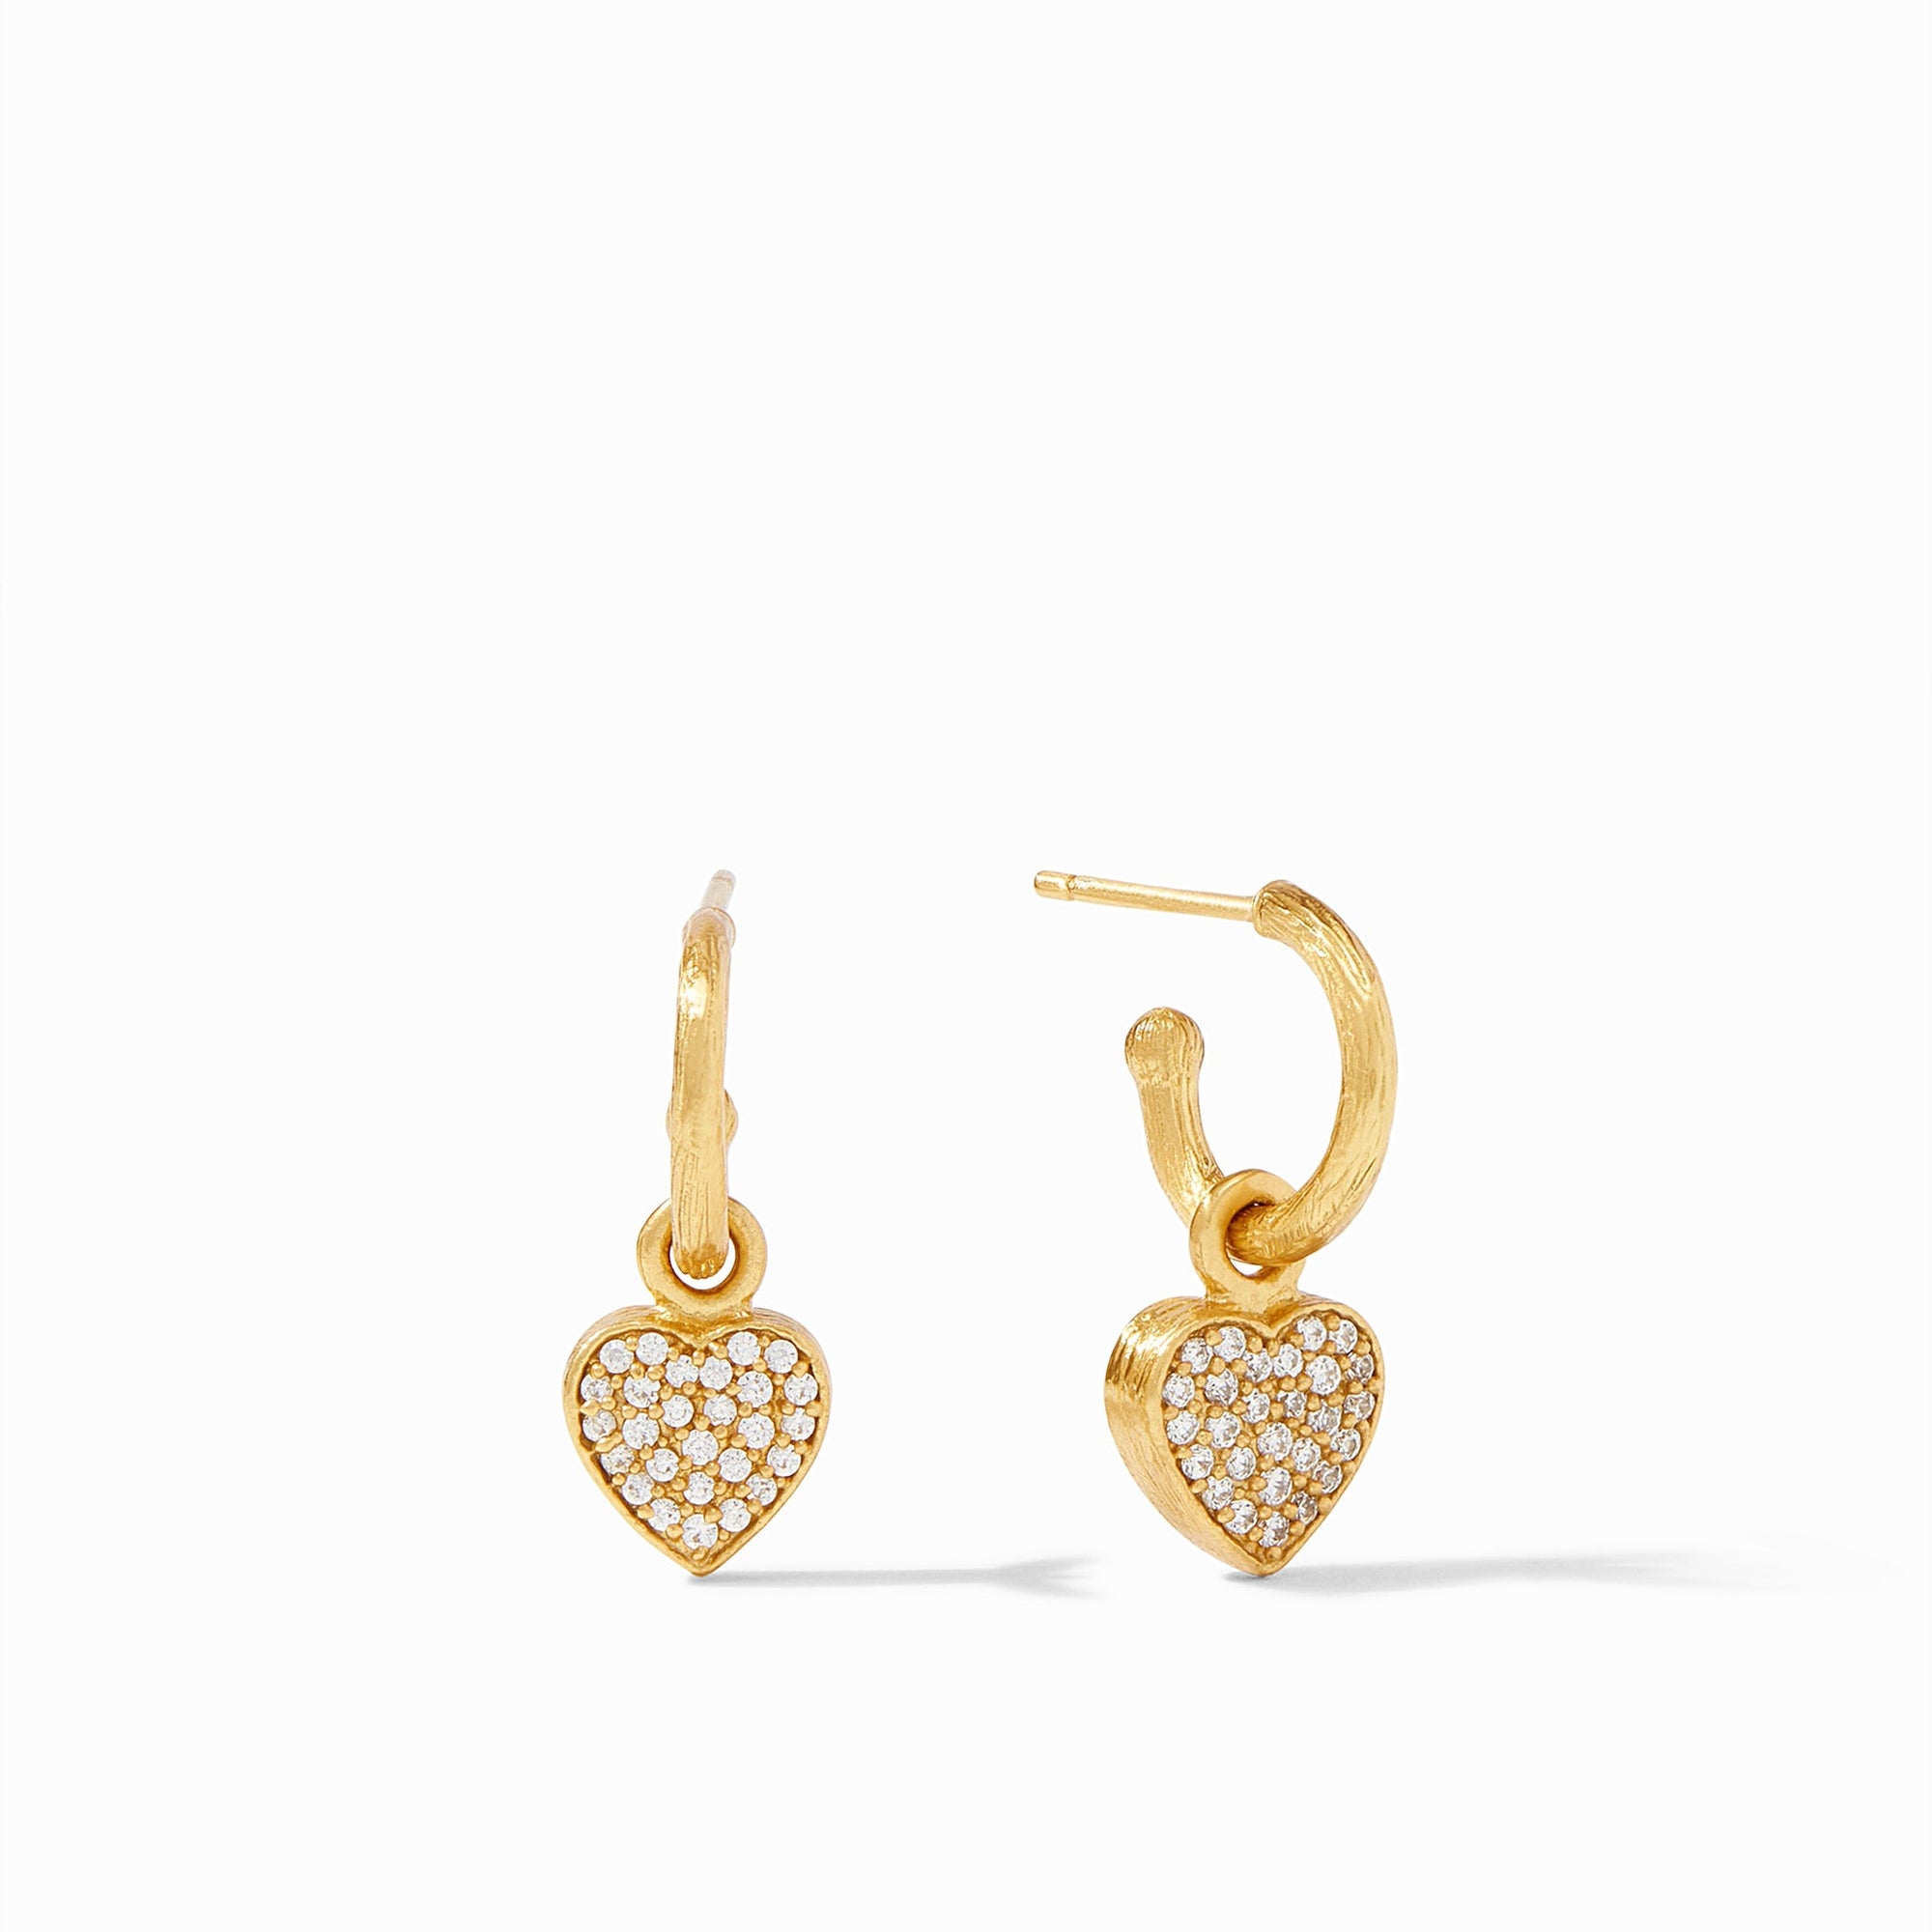 Julie Vos Julie Vos - Heart Pave Demi Hoop & Charm Earring Gold - CZs available at The Good Life Boutique